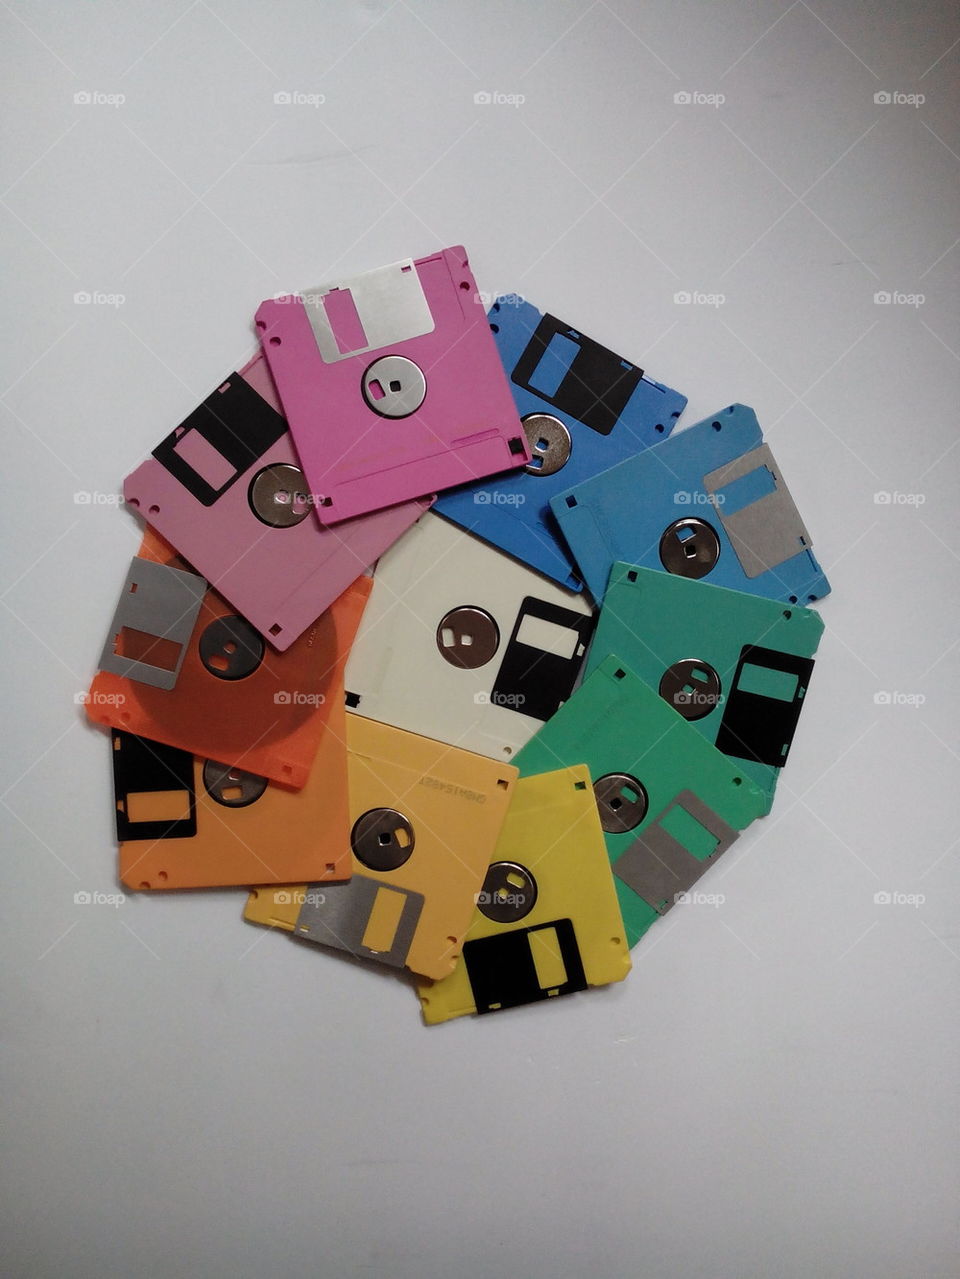 multi colors floppy disk data saving. remember those old storage disc